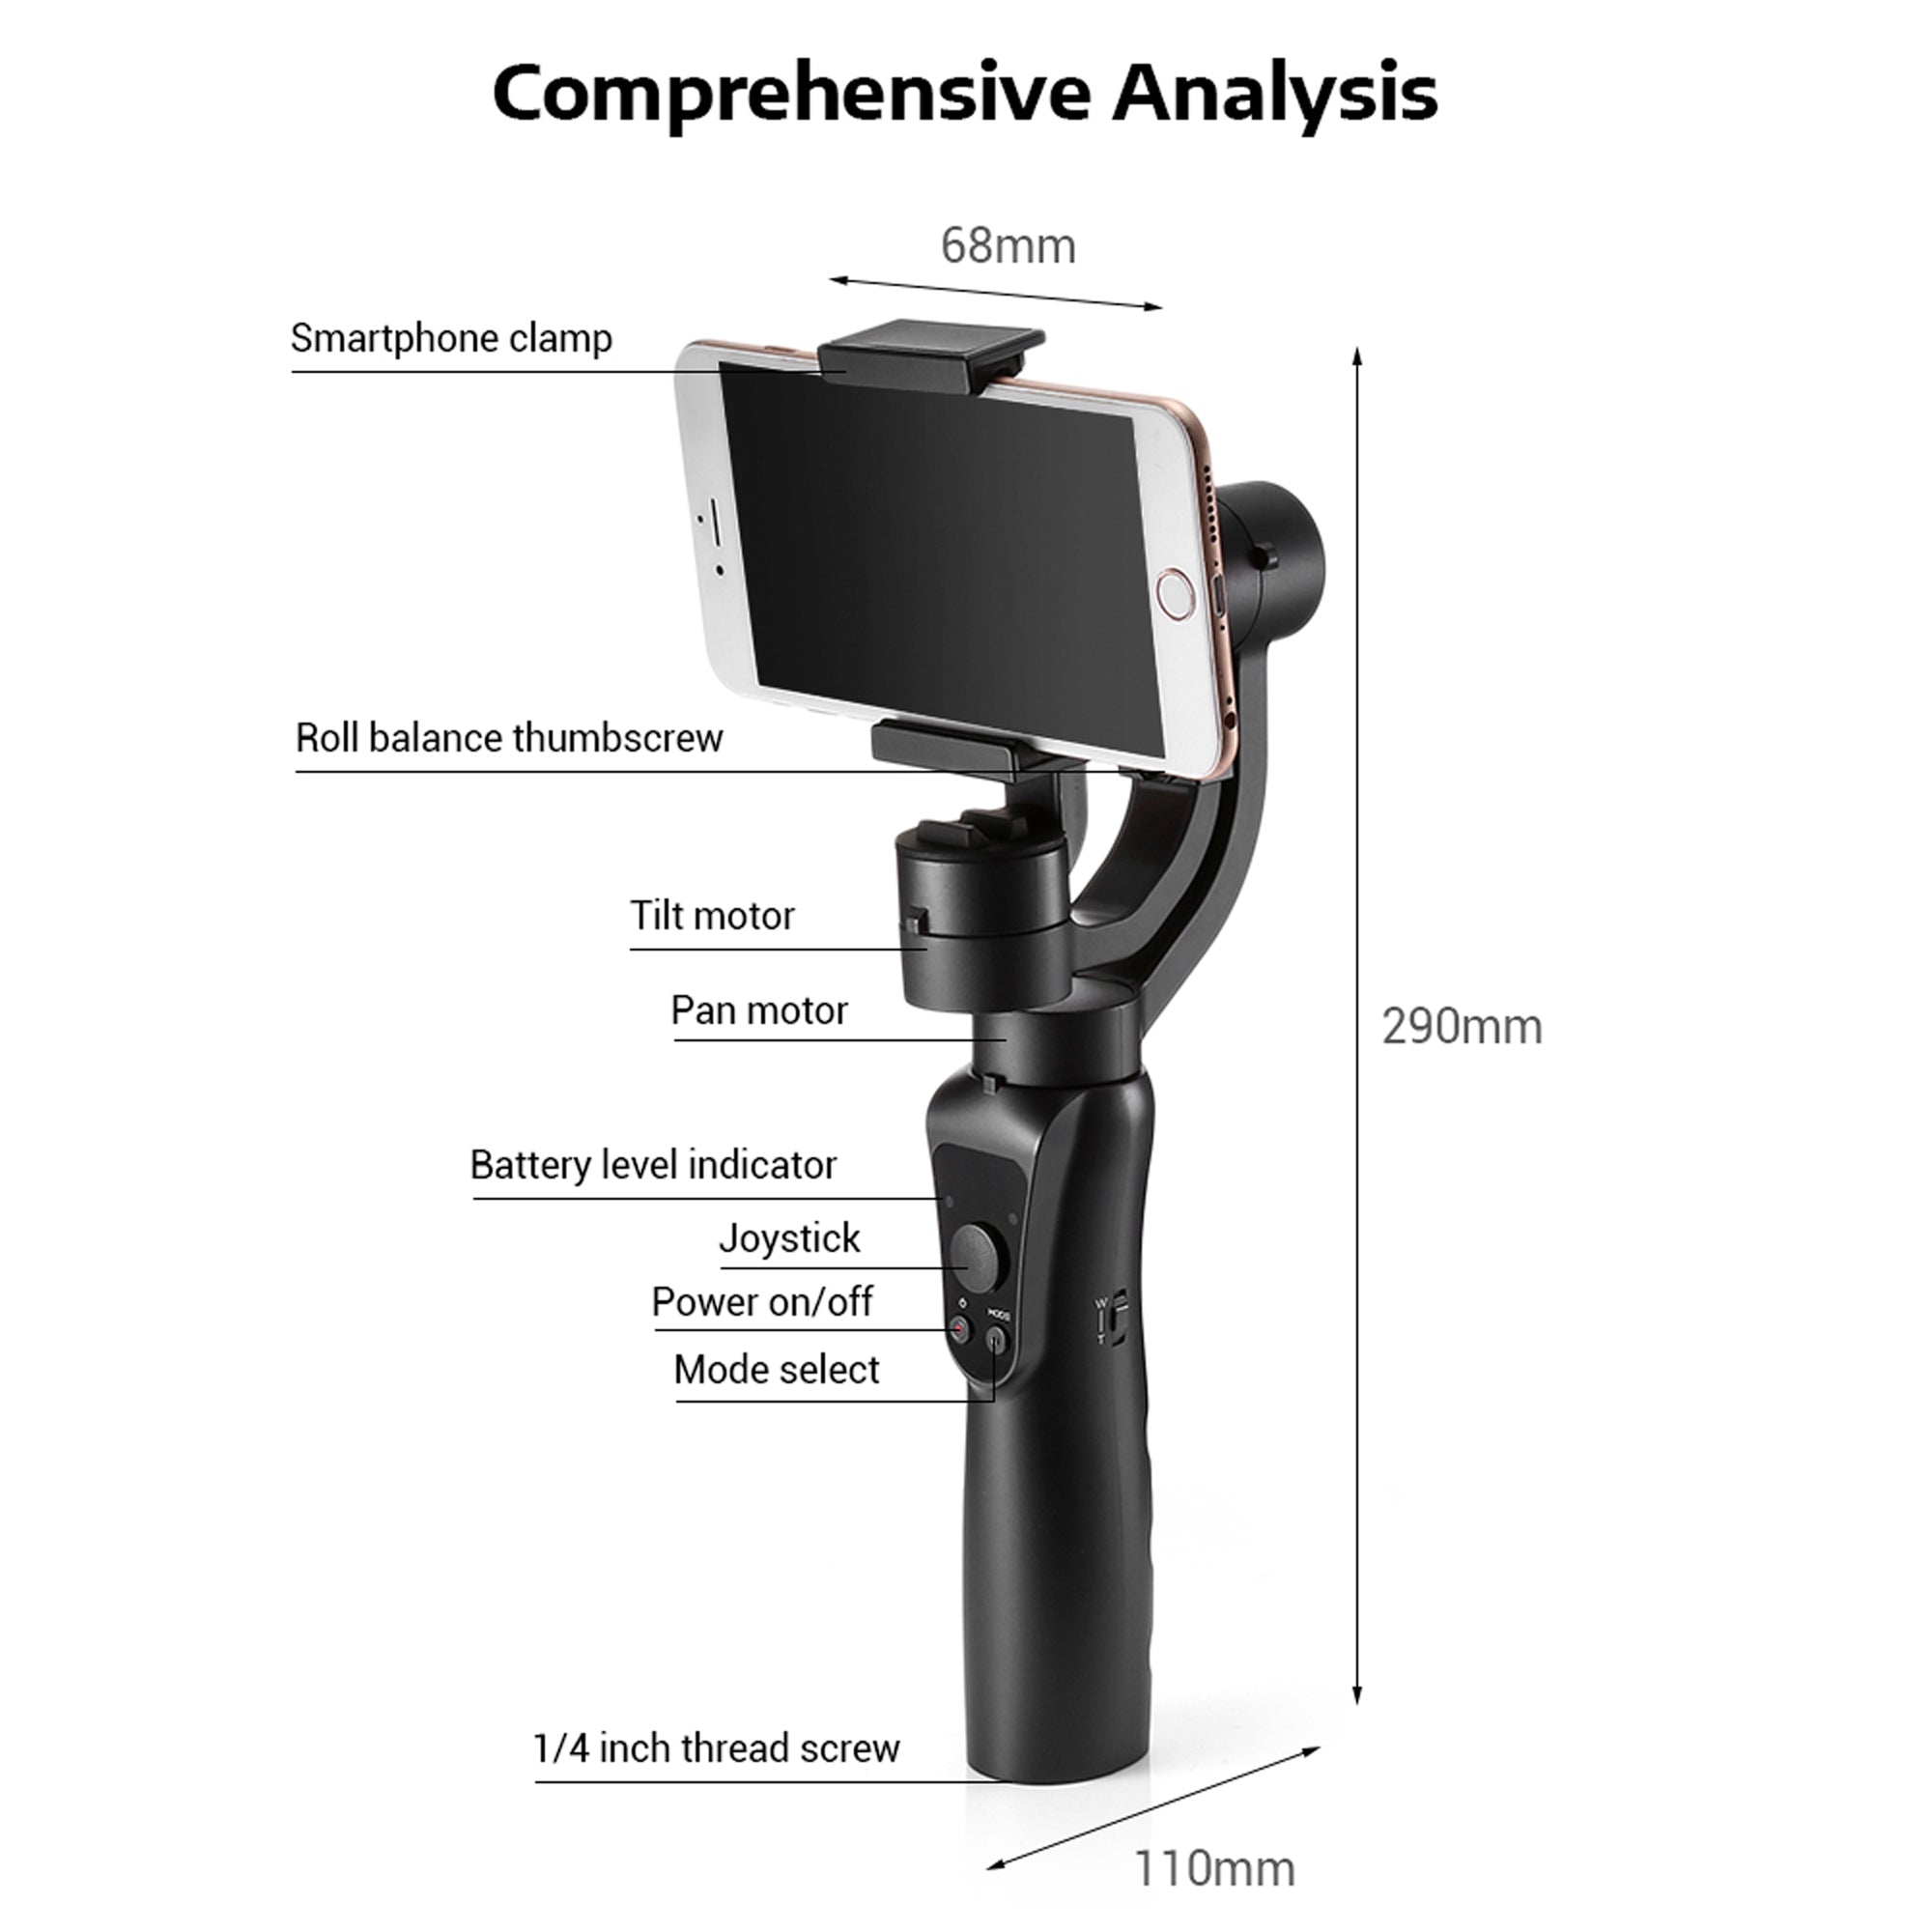 3-Axis Handheld Gimbal Stabilizer for Smartphones & Gopro with Face & Object Tracking Motion